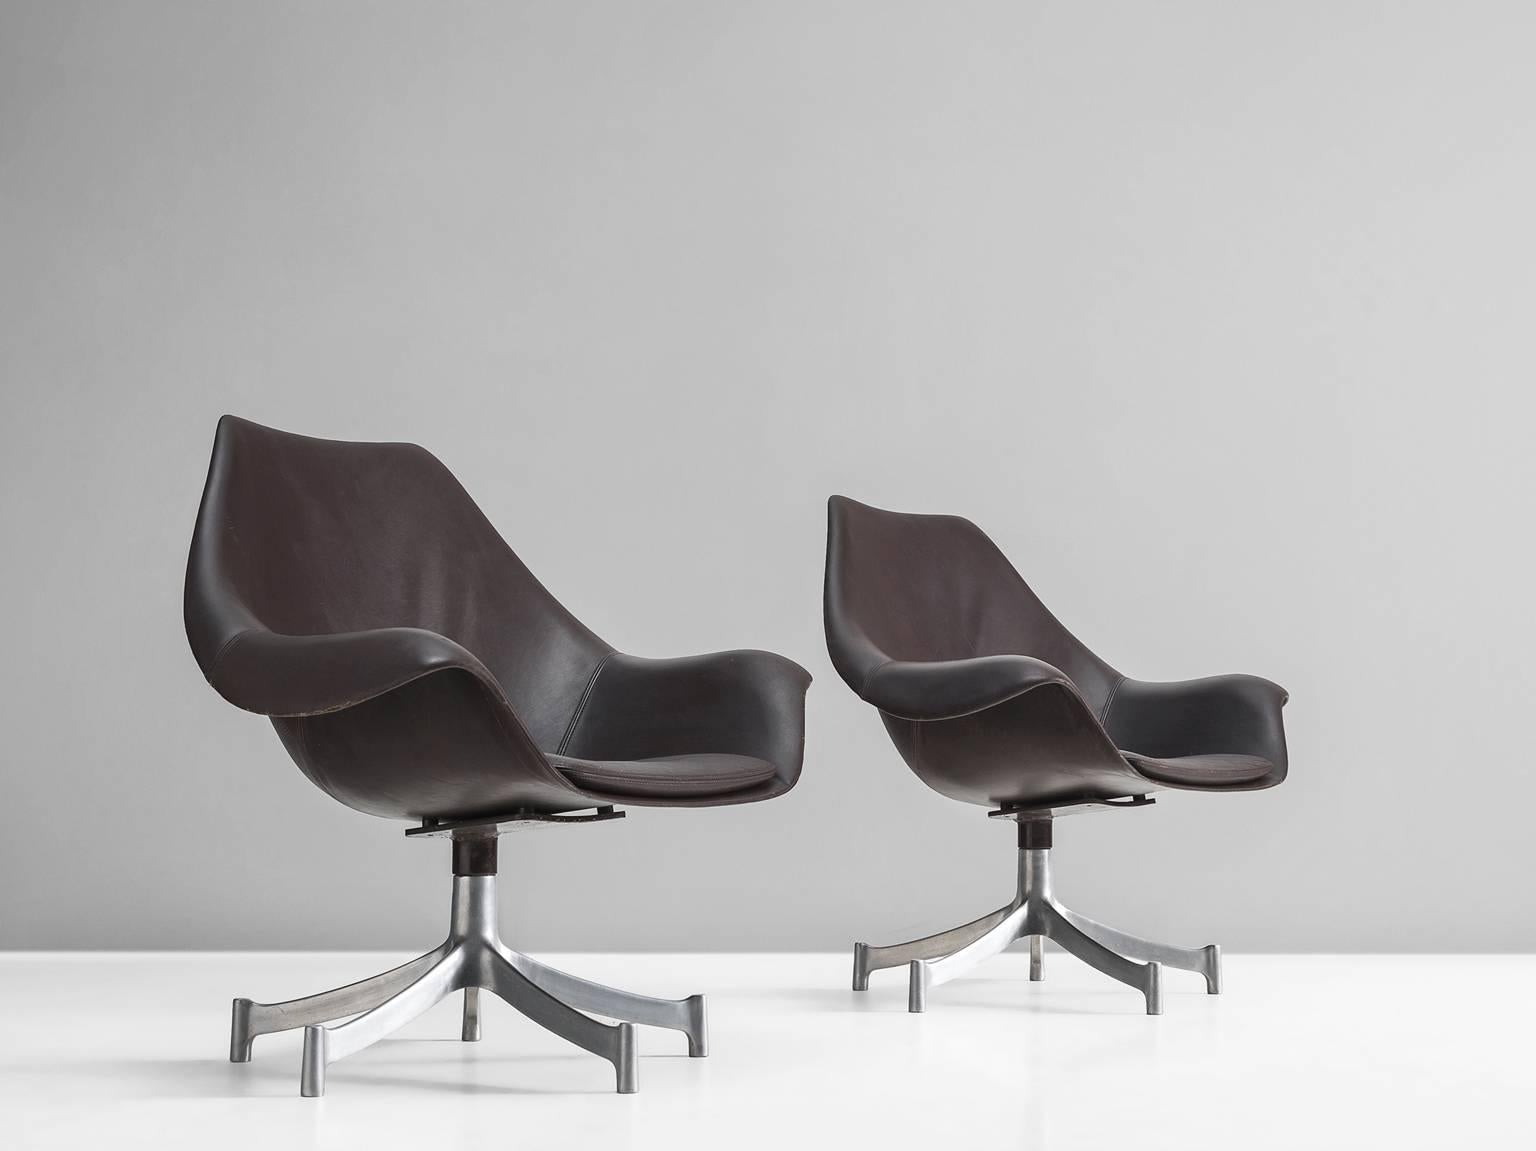 Set of two office chairs, model 932, designed by Jørgen Lund & Ole Larsen for Bo-Ex, Denmark, 1965-1966. 

These chairs are designed by Jørgen Lund & Ole Larsen and produced by Bo-Ex. The moulded shell of this swivel lounge chair is upholstered in